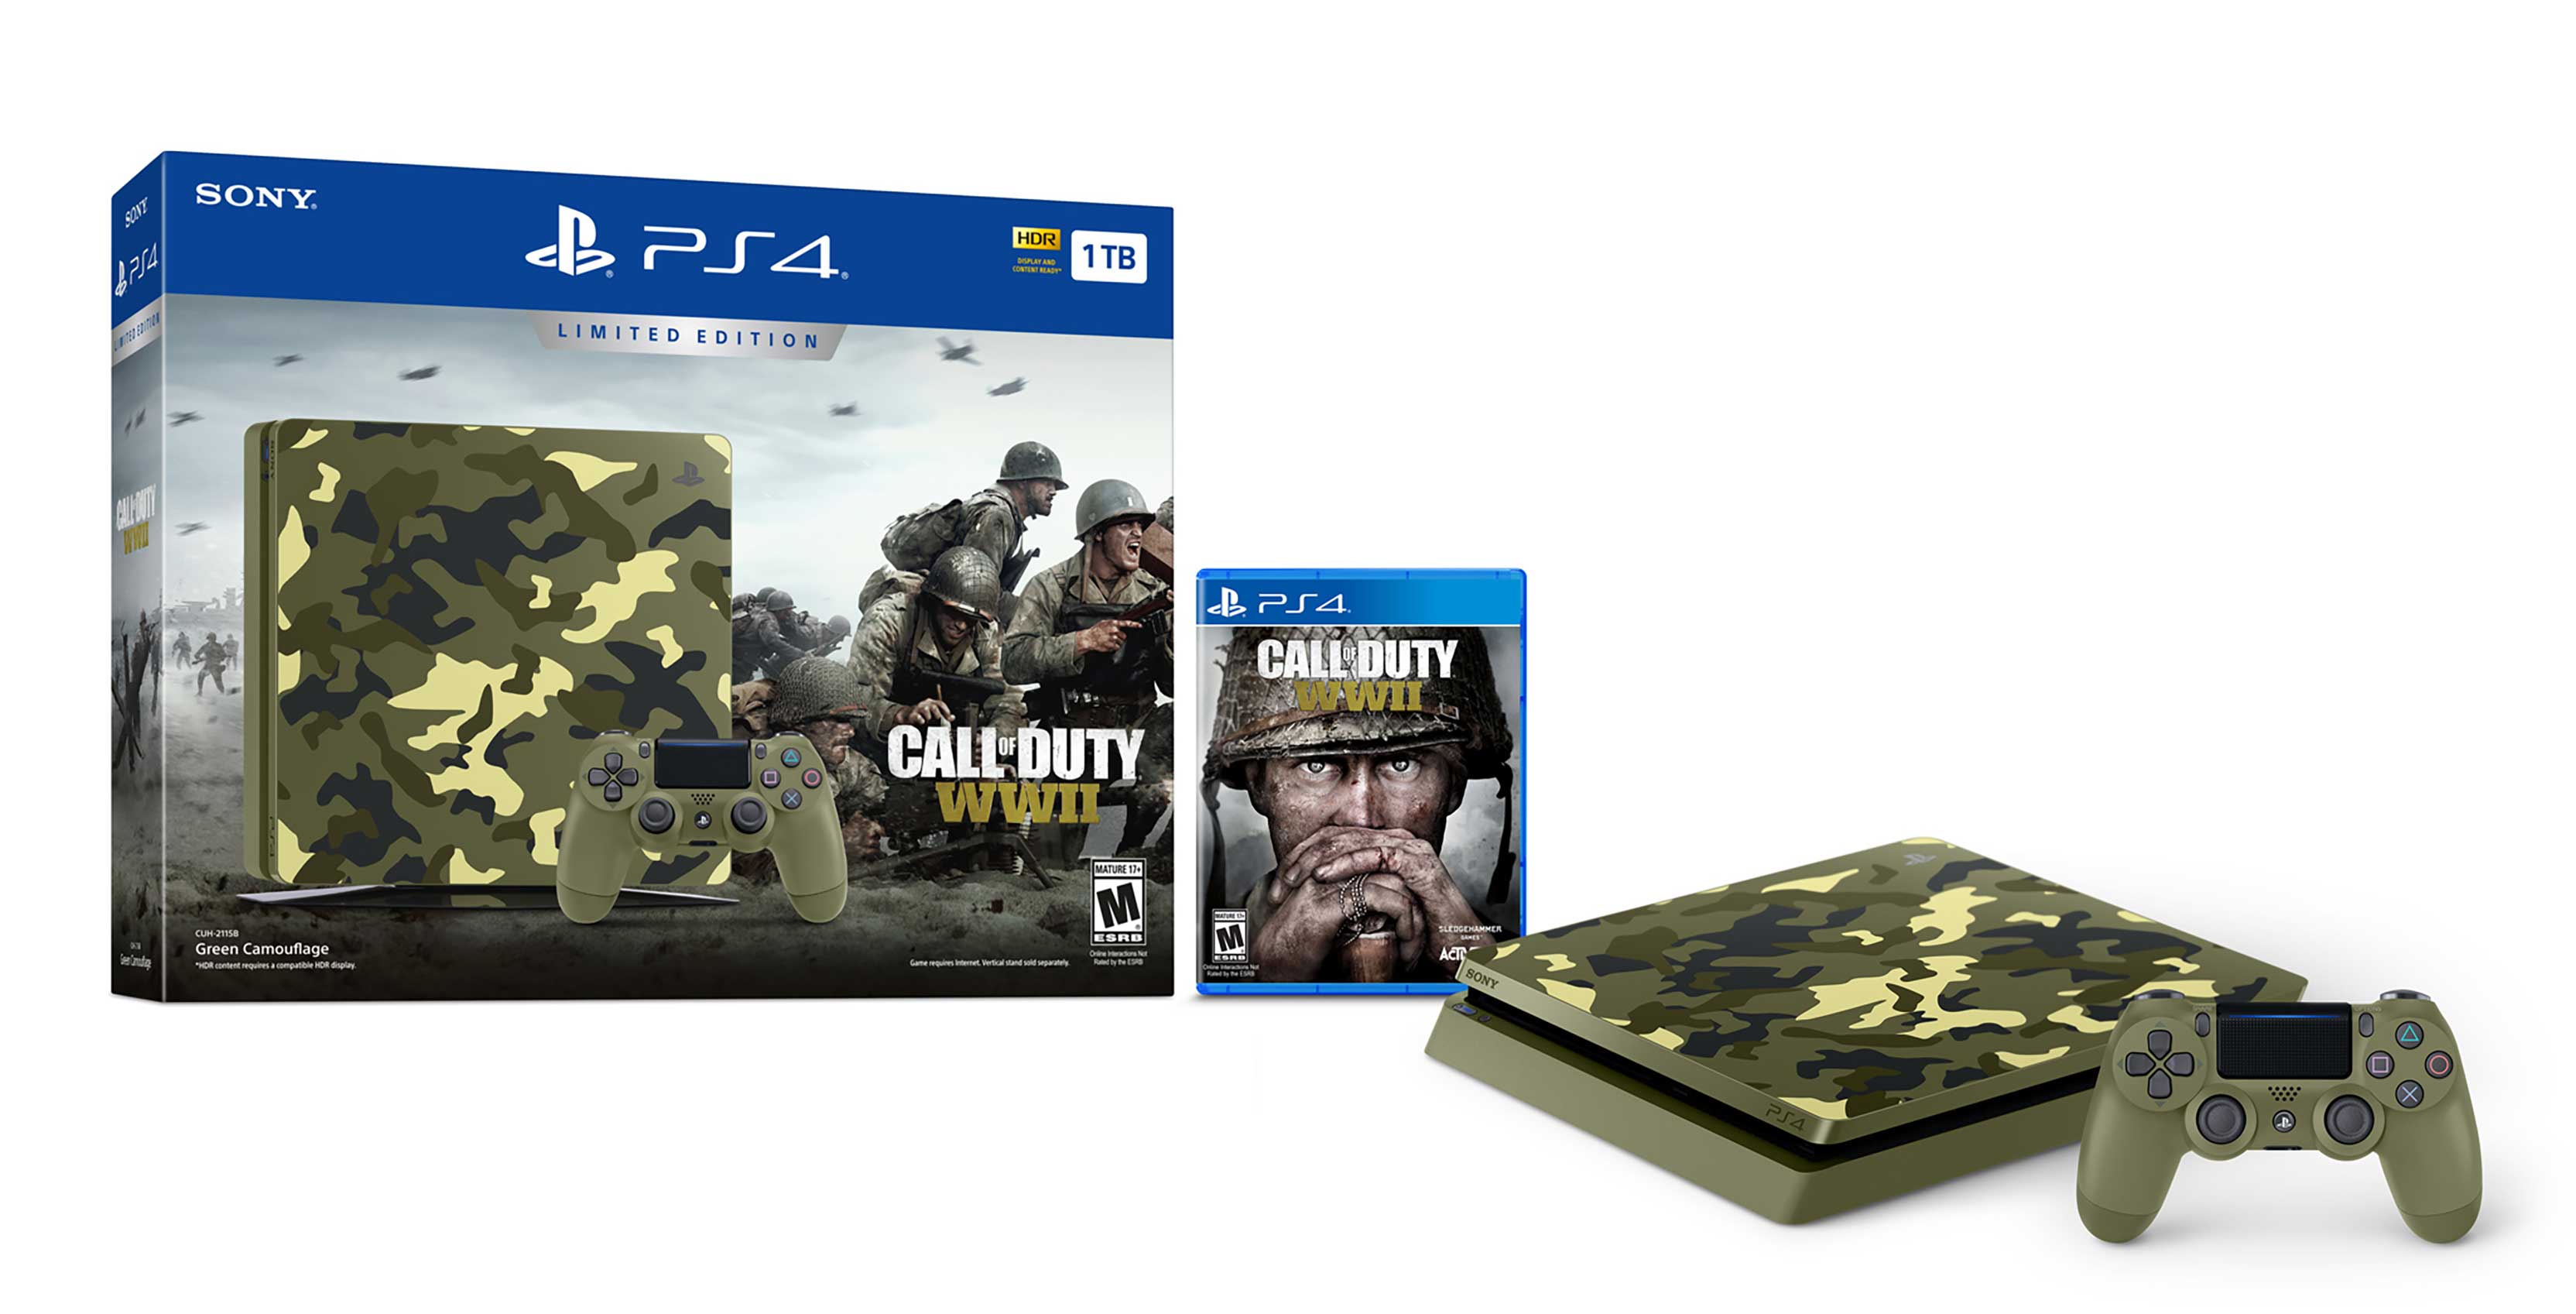 Call of duty ww2 ps4. PLAYSTATION 4 Slim Call of Duty Limited Edition. Call of Duty WWII ПС 4. Call of Duty ww2 на пс4. PLAYSTATION 4 Call of Duty ww2.